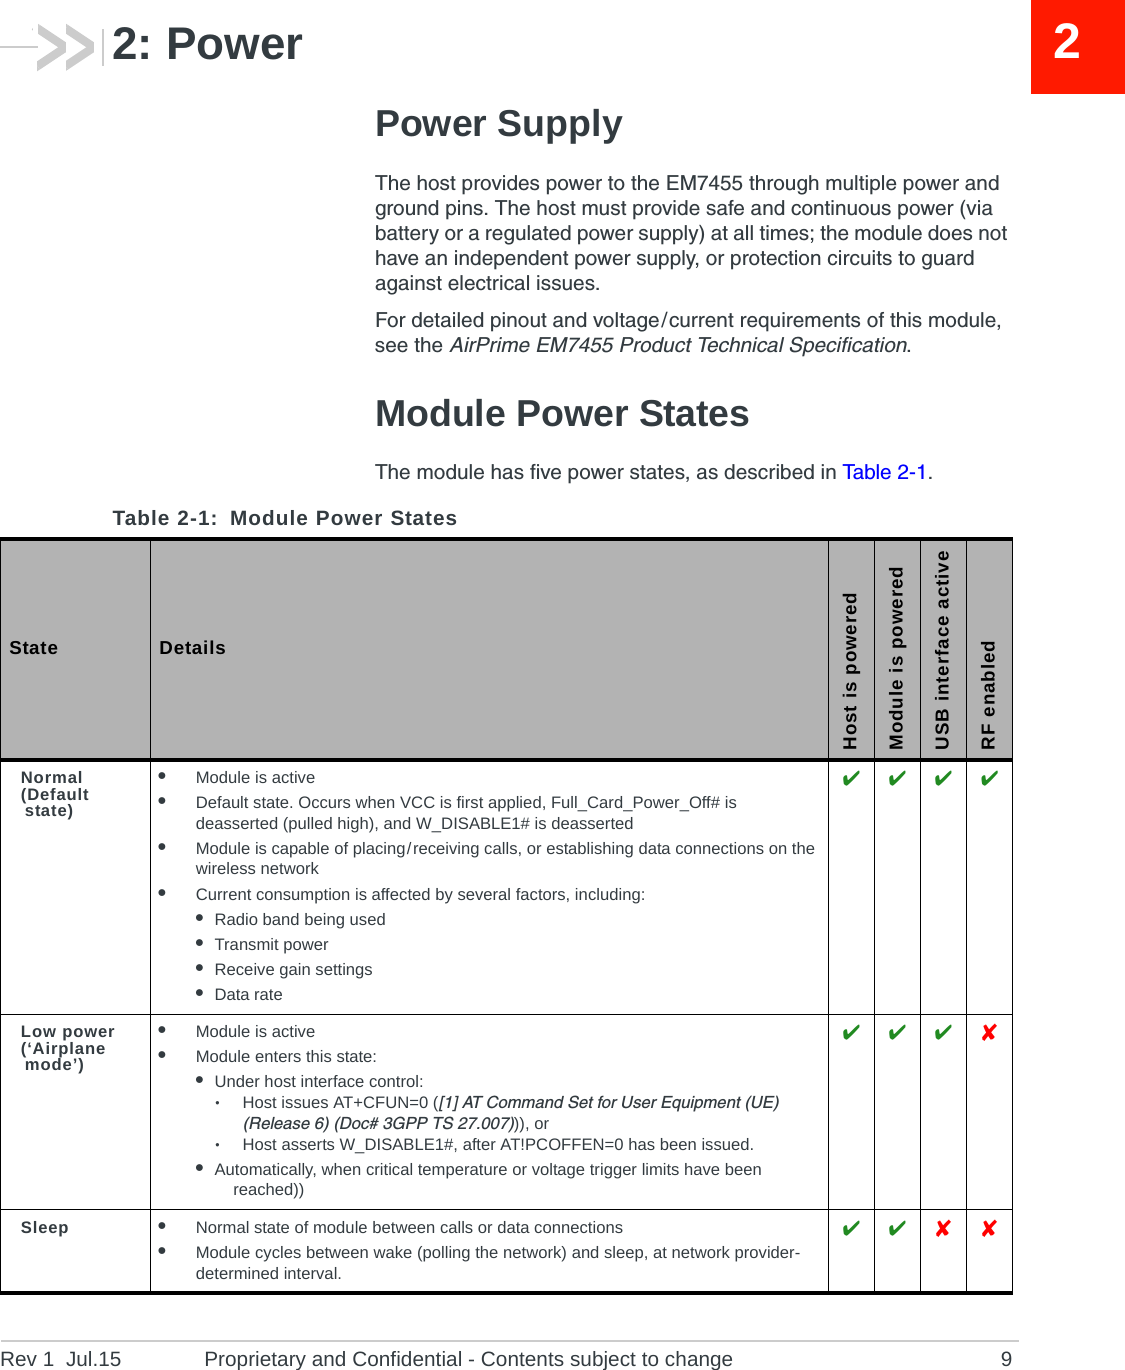 Rev 1  Jul.15 Proprietary and Confidential - Contents subject to change 922: PowerPower SupplyThe host provides power to the EM7455 through multiple power and ground pins. The host must provide safe and continuous power (via battery or a regulated power supply) at all times; the module does not have an independent power supply, or protection circuits to guard against electrical issues.For detailed pinout and voltage / current requirements of this module, see the AirPrime EM7455 Product Technical Specification.Module Power StatesThe module has five power states, as described in Ta b l e  2-1. Table 2-1: Module Power States State DetailsHost is poweredModule is poweredUSB interface activeRF enabledNormal(Default state)•Module is active•Default state. Occurs when VCC is first applied, Full_Card_Power_Off# is deasserted (pulled high), and W_DISABLE1# is deasserted•Module is capable of placing / receiving calls, or establishing data connections on the wireless network•Current consumption is affected by several factors, including:•Radio band being used•Transmit power•Receive gain settings•Data rate   Low power(‘Airplane mode’)•Module is active•Module enters this state:•Under host interface control:·Host issues AT+CFUN=0 ([1] AT Command Set for User Equipment (UE) (Release 6) (Doc# 3GPP TS 27.007))), or·Host asserts W_DISABLE1#, after AT!PCOFFEN=0 has been issued.•Automatically, when critical temperature or voltage trigger limits have been reached))   Sleep •Normal state of module between calls or data connections•Module cycles between wake (polling the network) and sleep, at network provider-determined interval.   